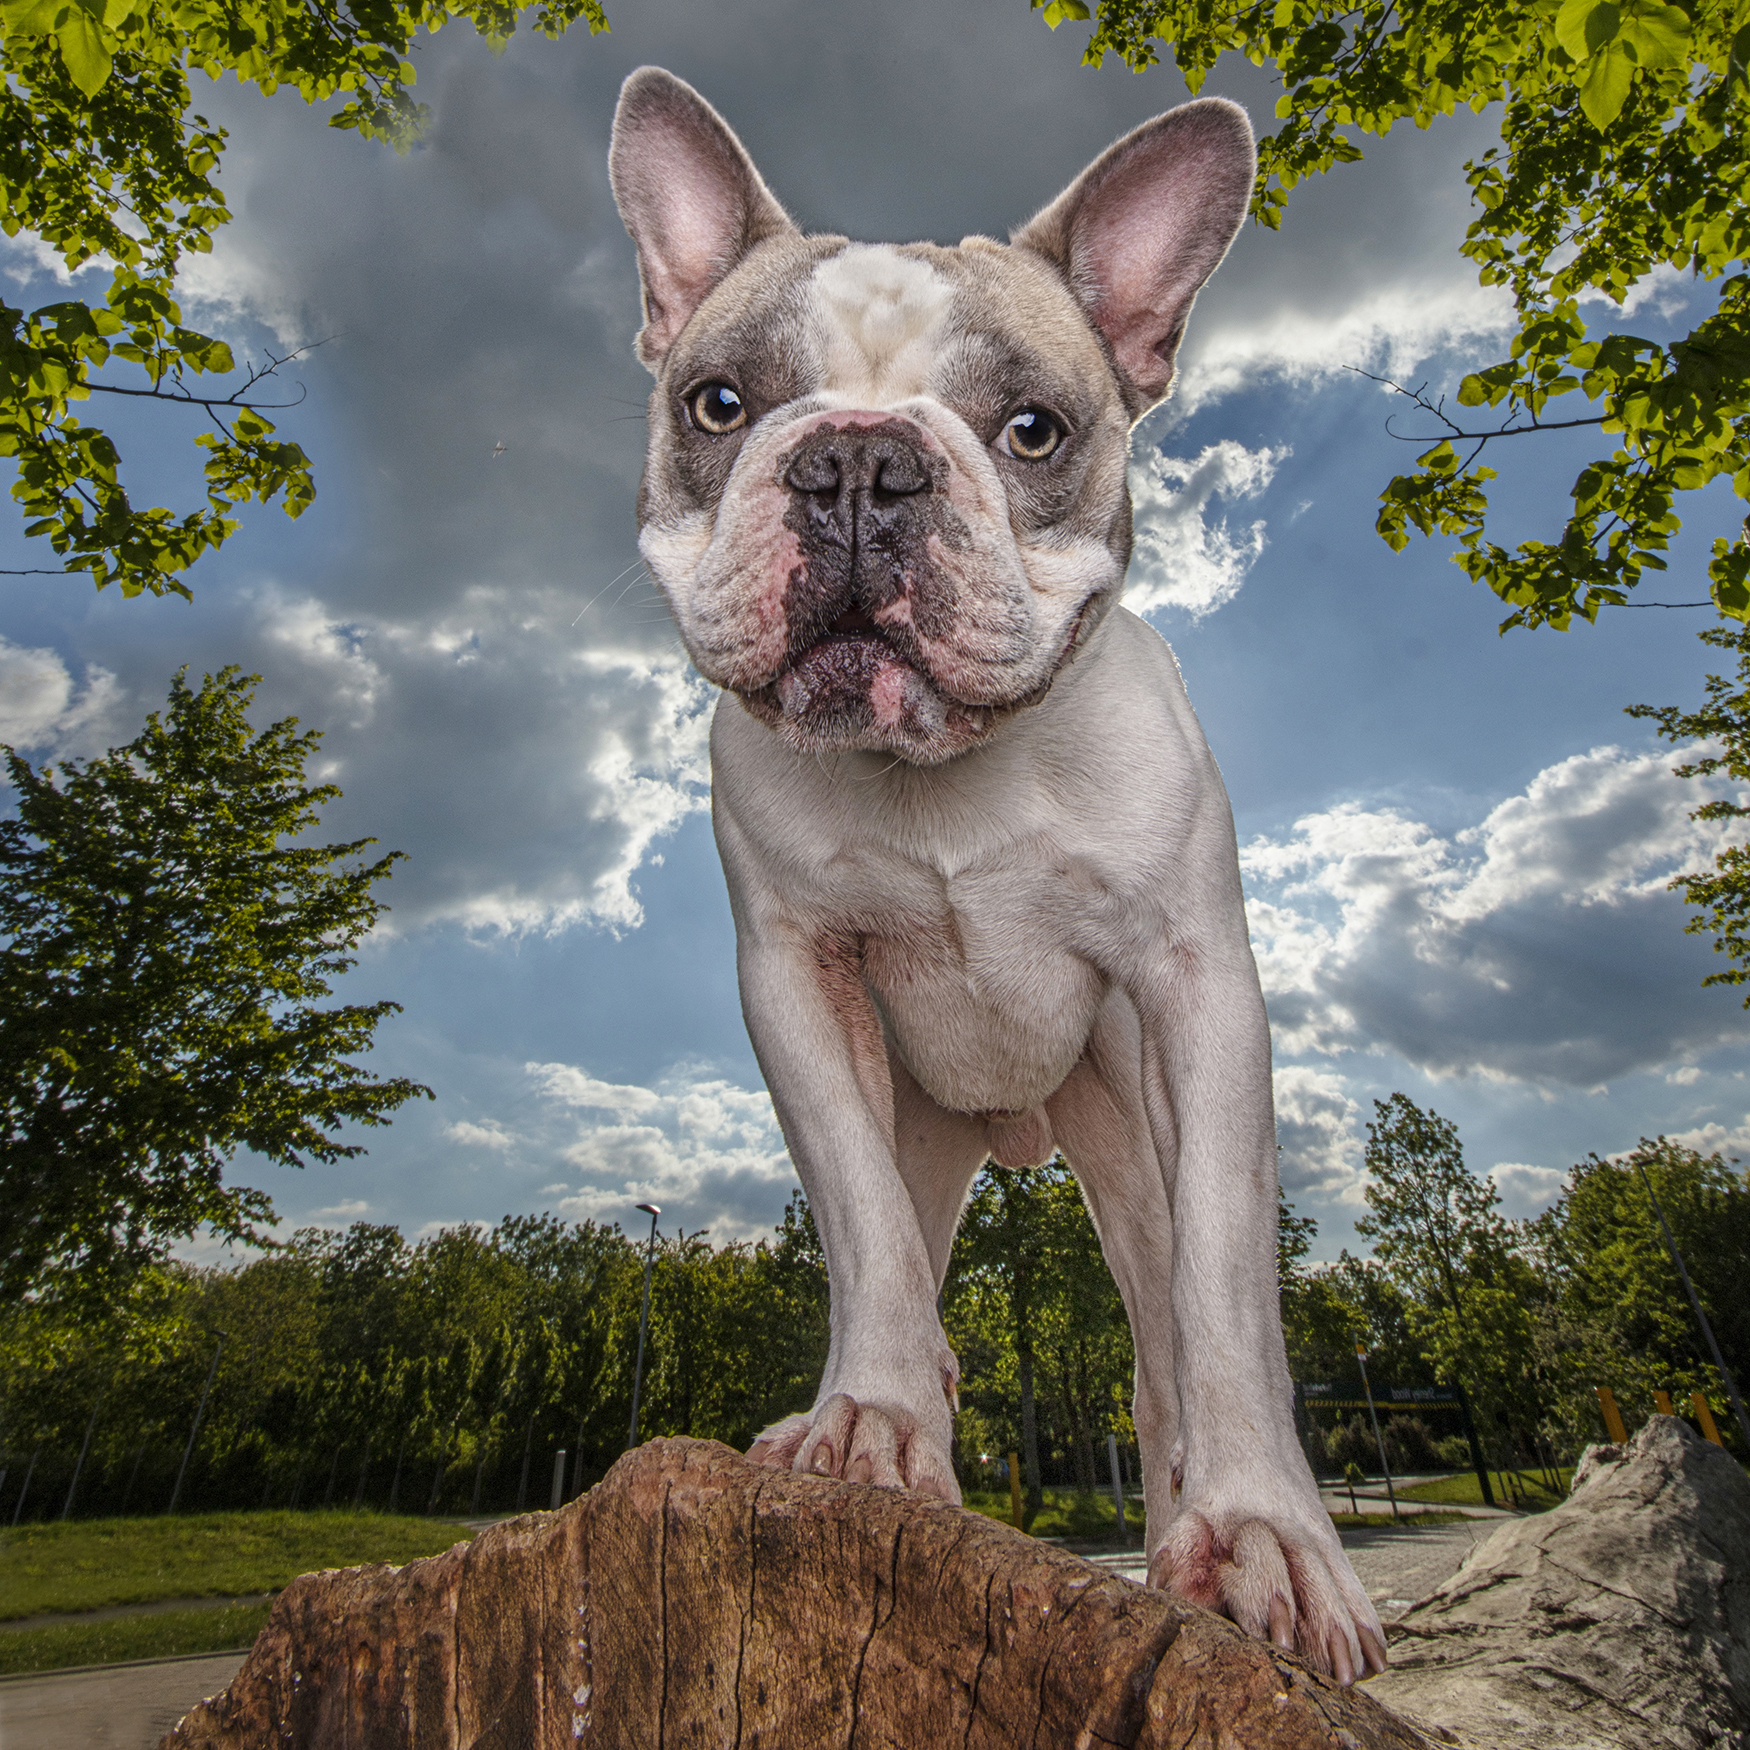 Dog and Pet Photography in London | Photographed on location by professional Award winning Dog photographer Adrian Bullers